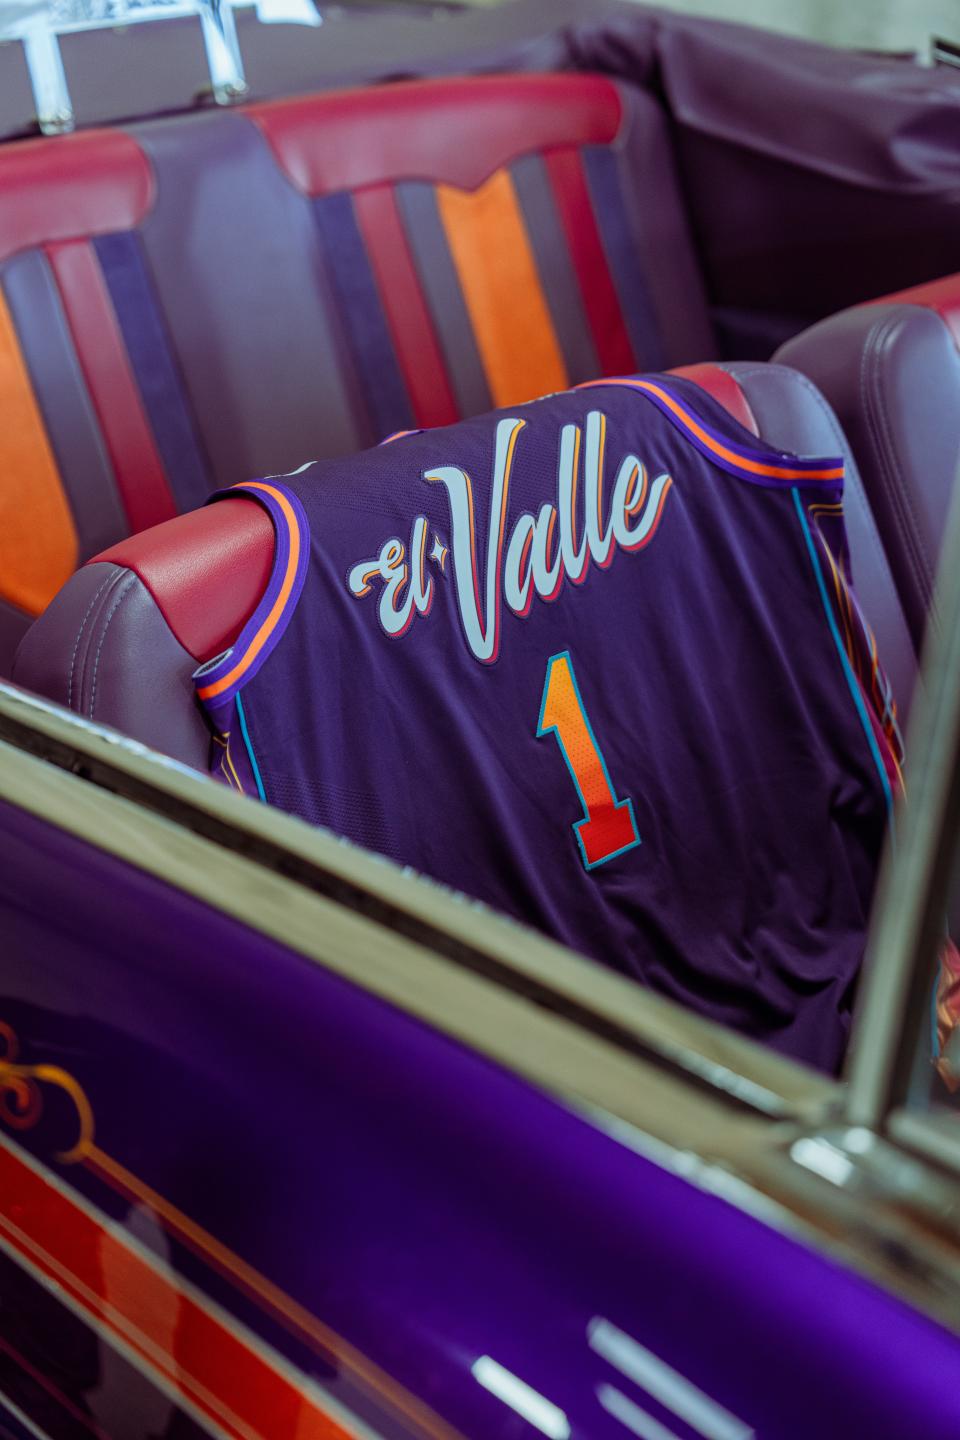 Devin Booker 'El Valle' jersey with car.